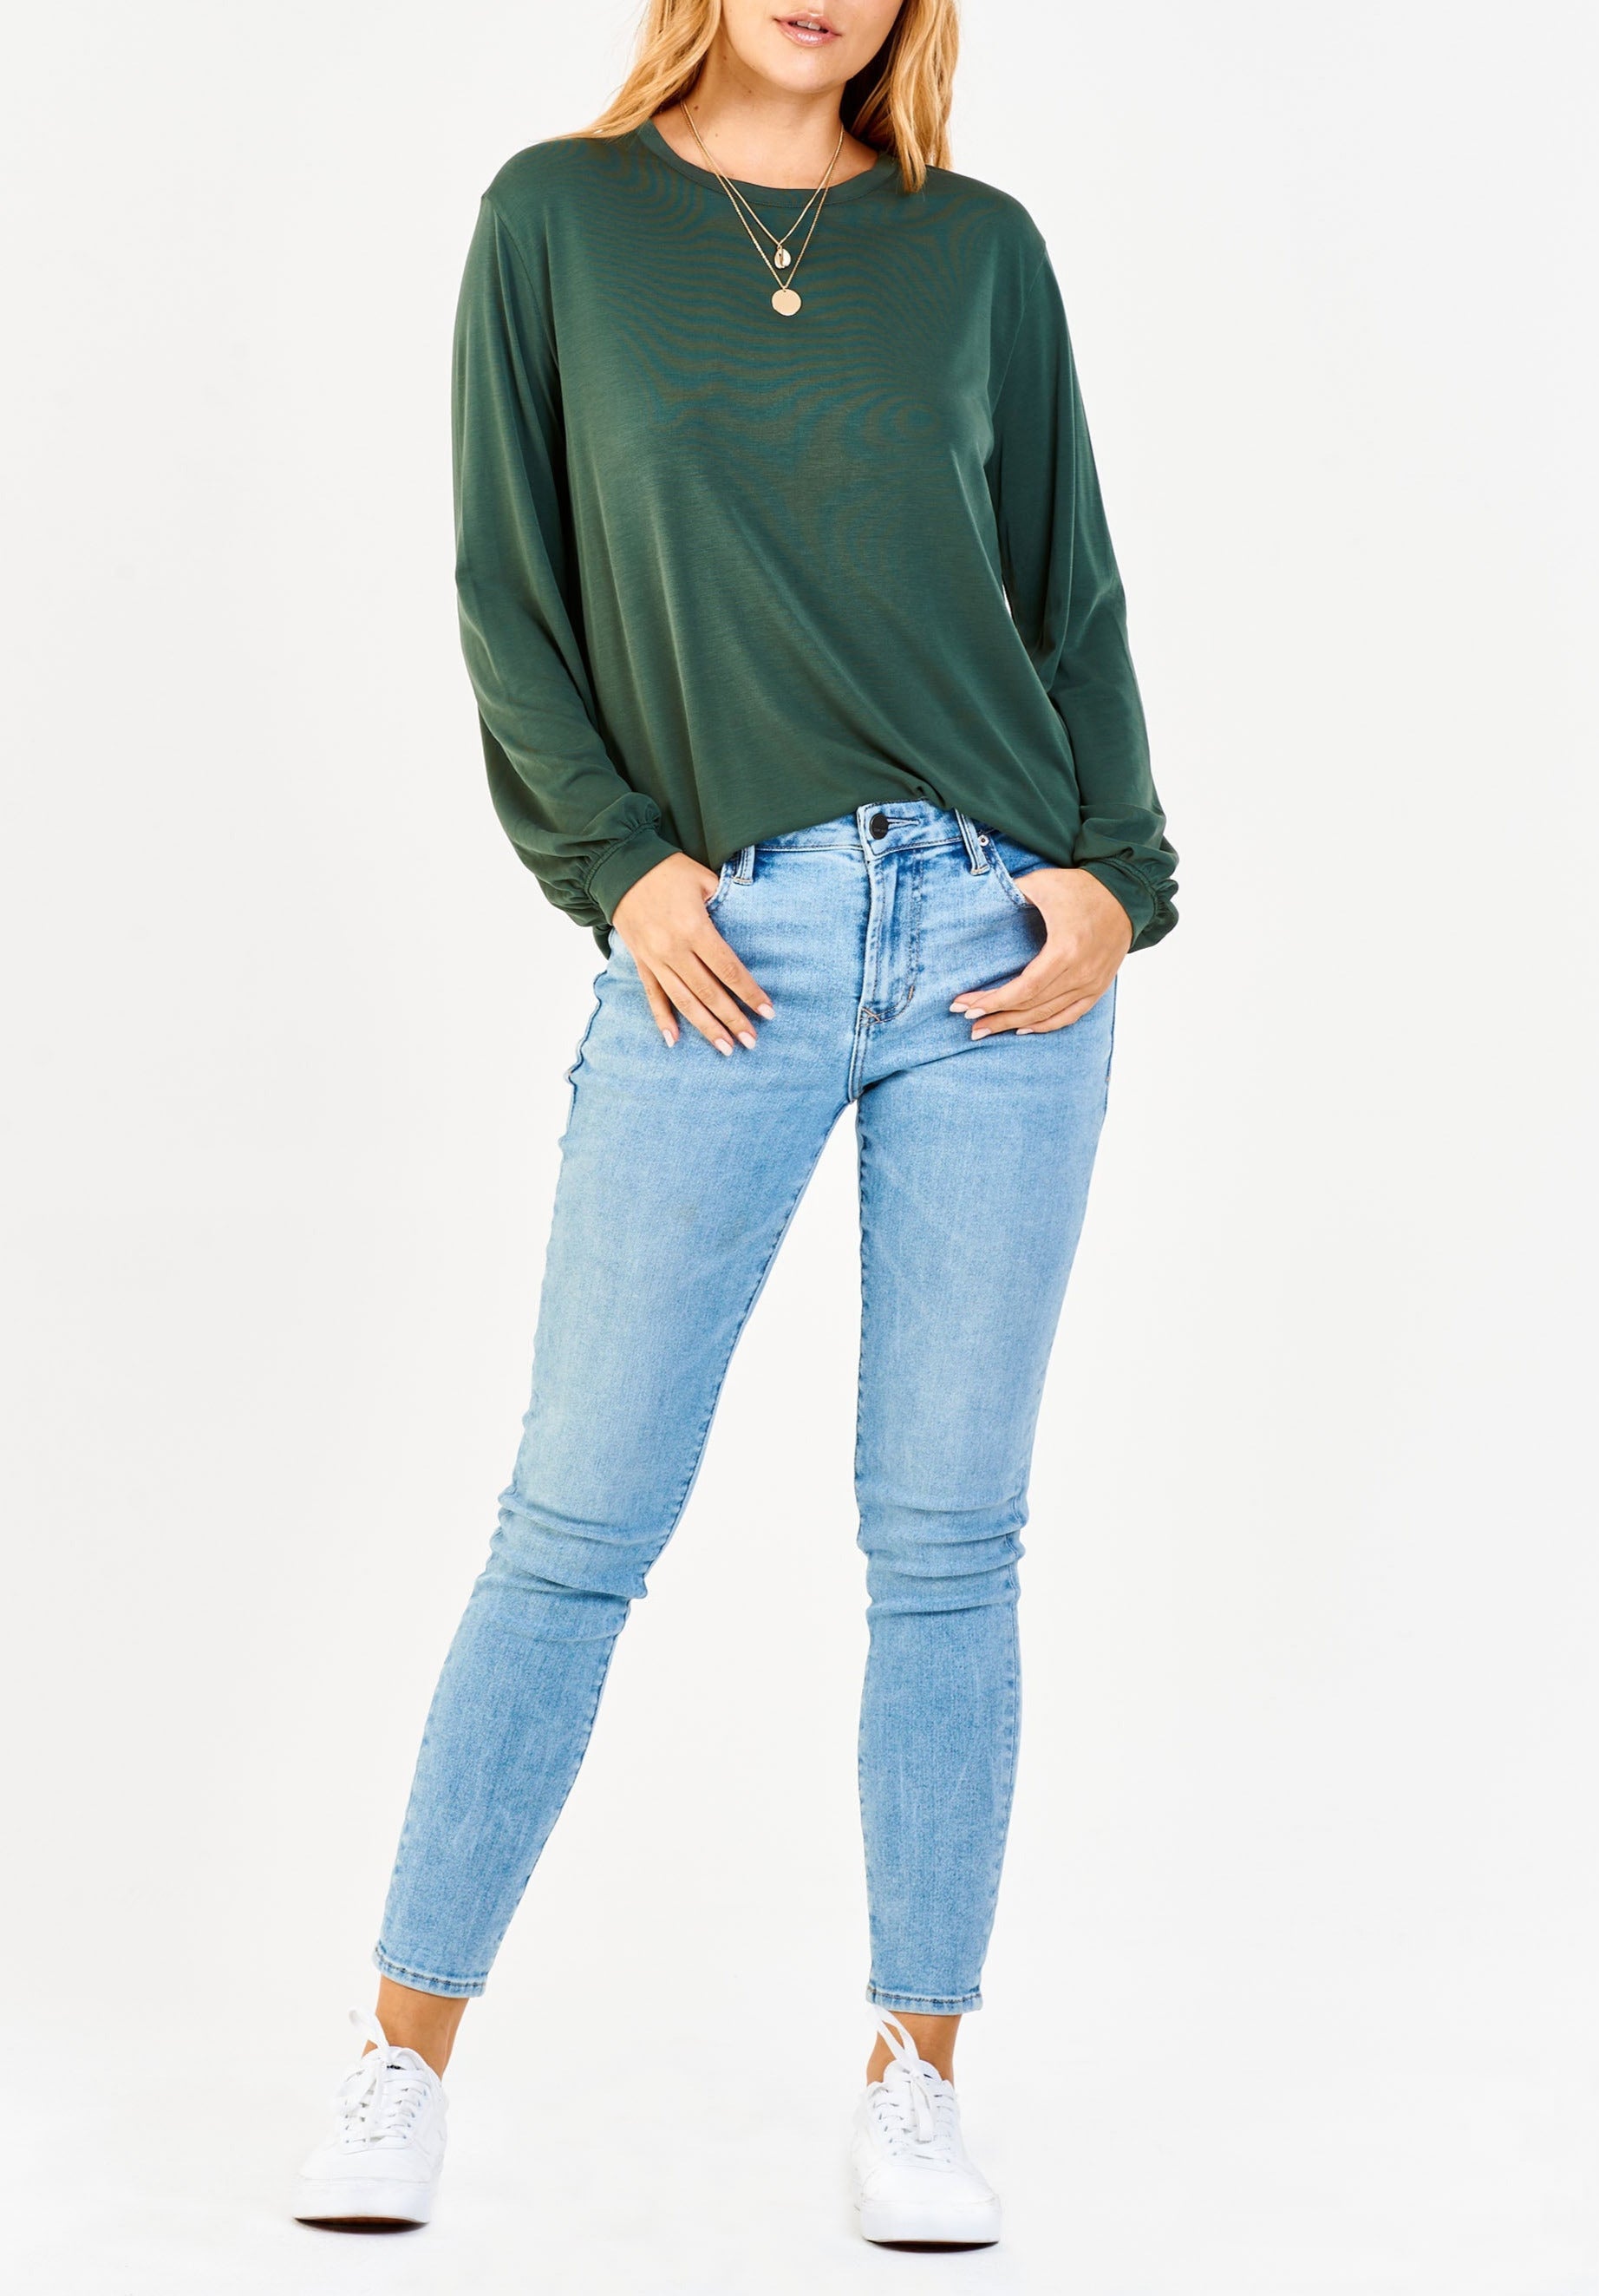 matilda-basic-long-sleeve-top-emerald-full-image-another-love-clothing